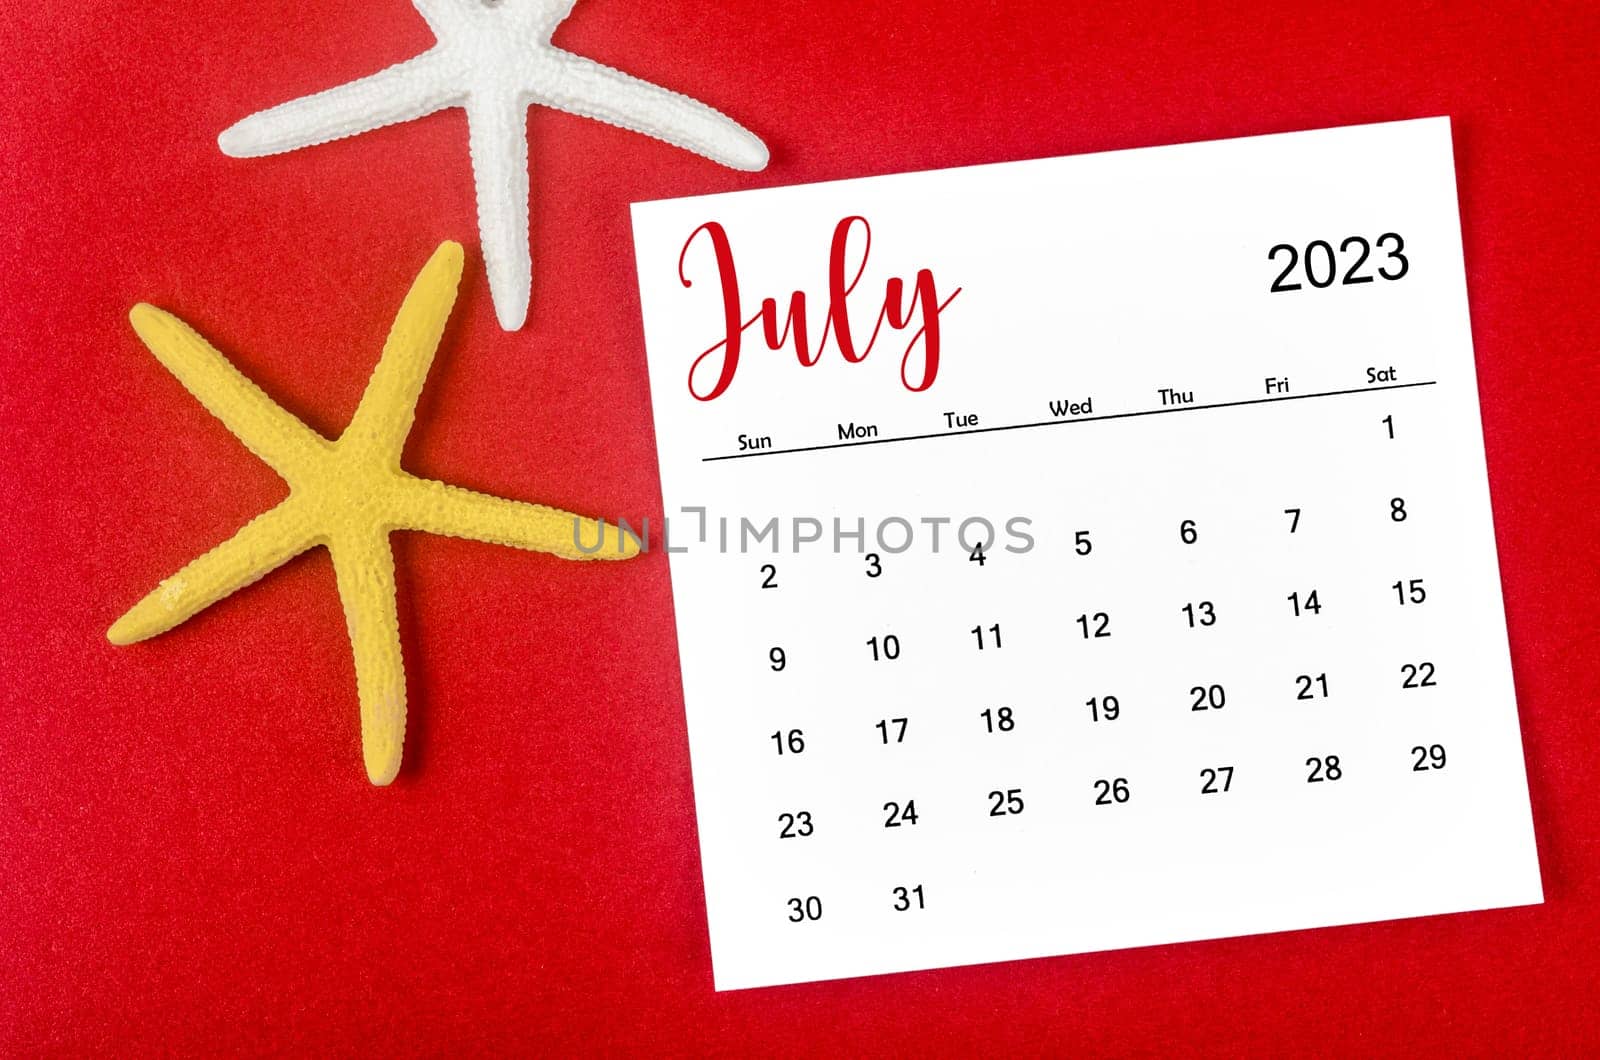 The July 2023 Monthly calendar with Starfish on red background. by Gamjai